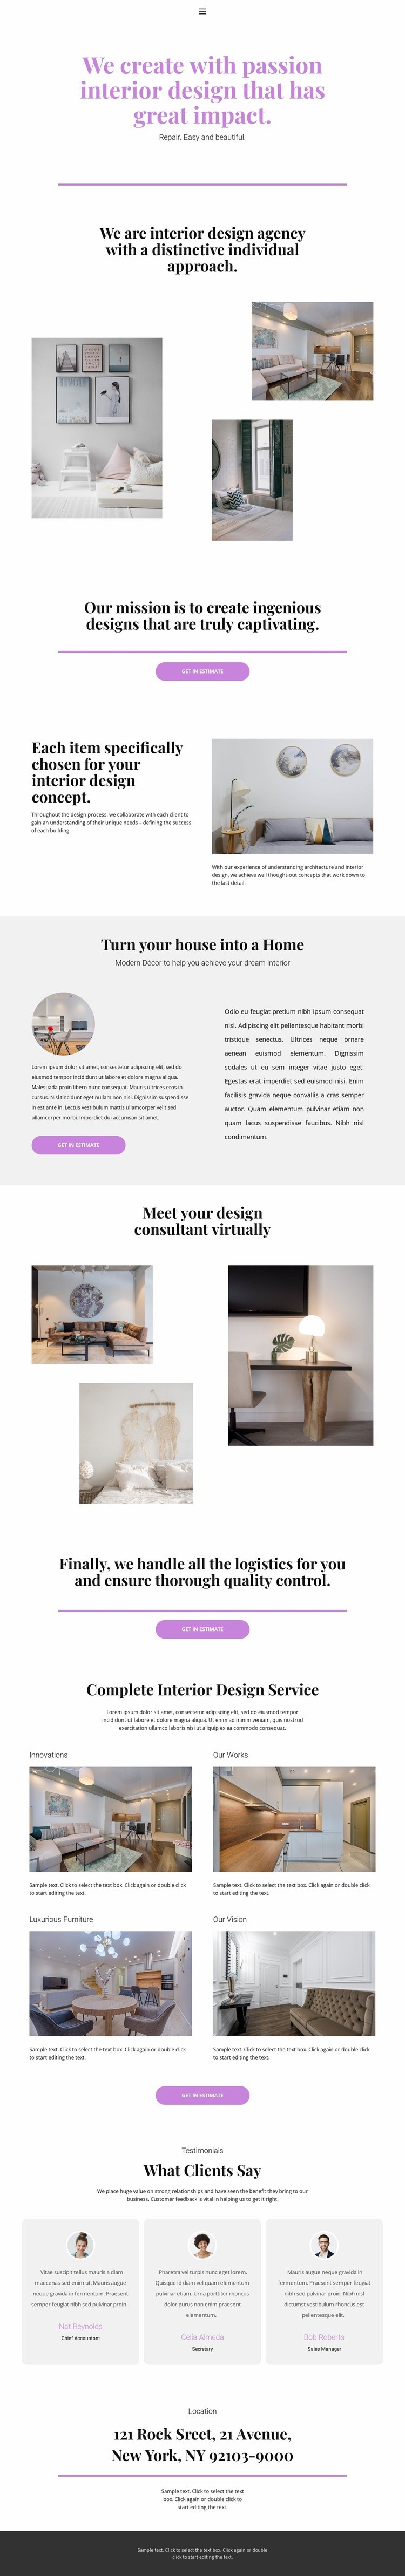 Choice of design for the house Webflow Template Alternative